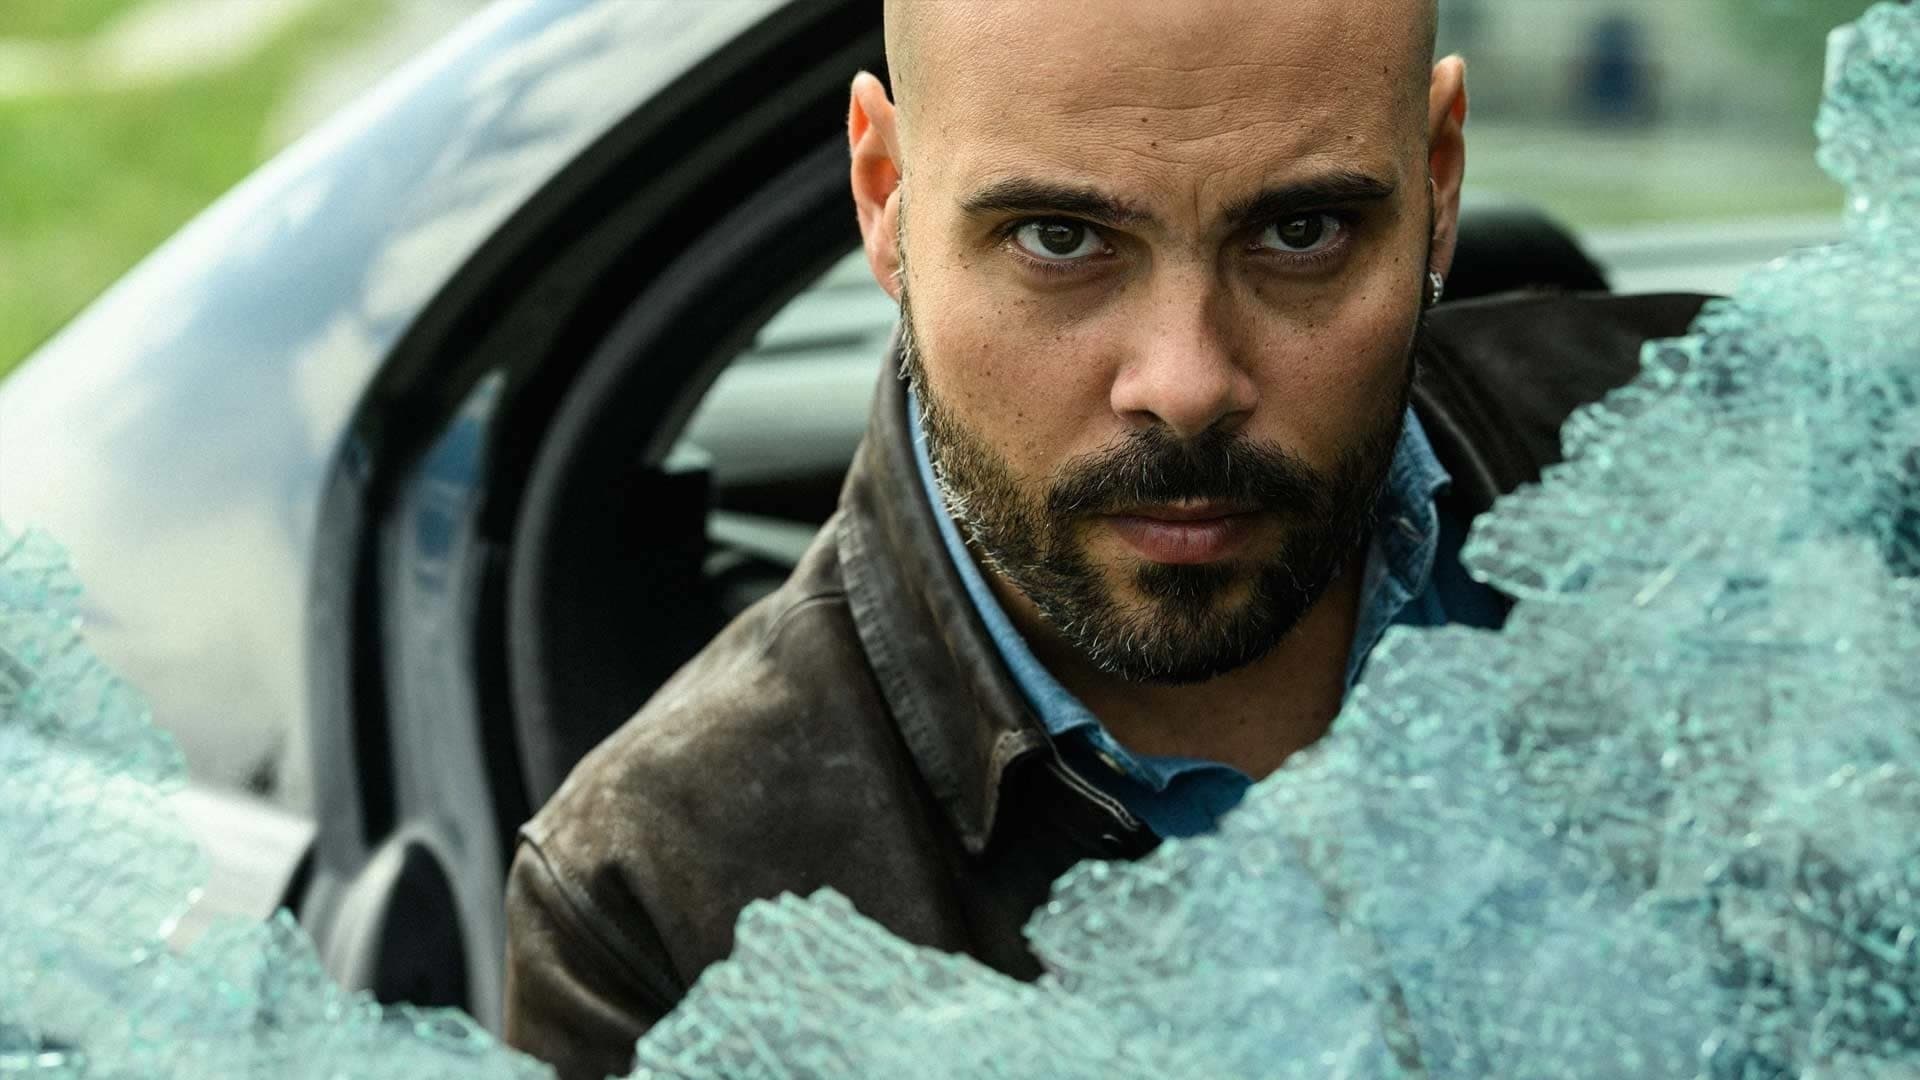 limmortale review gomorra